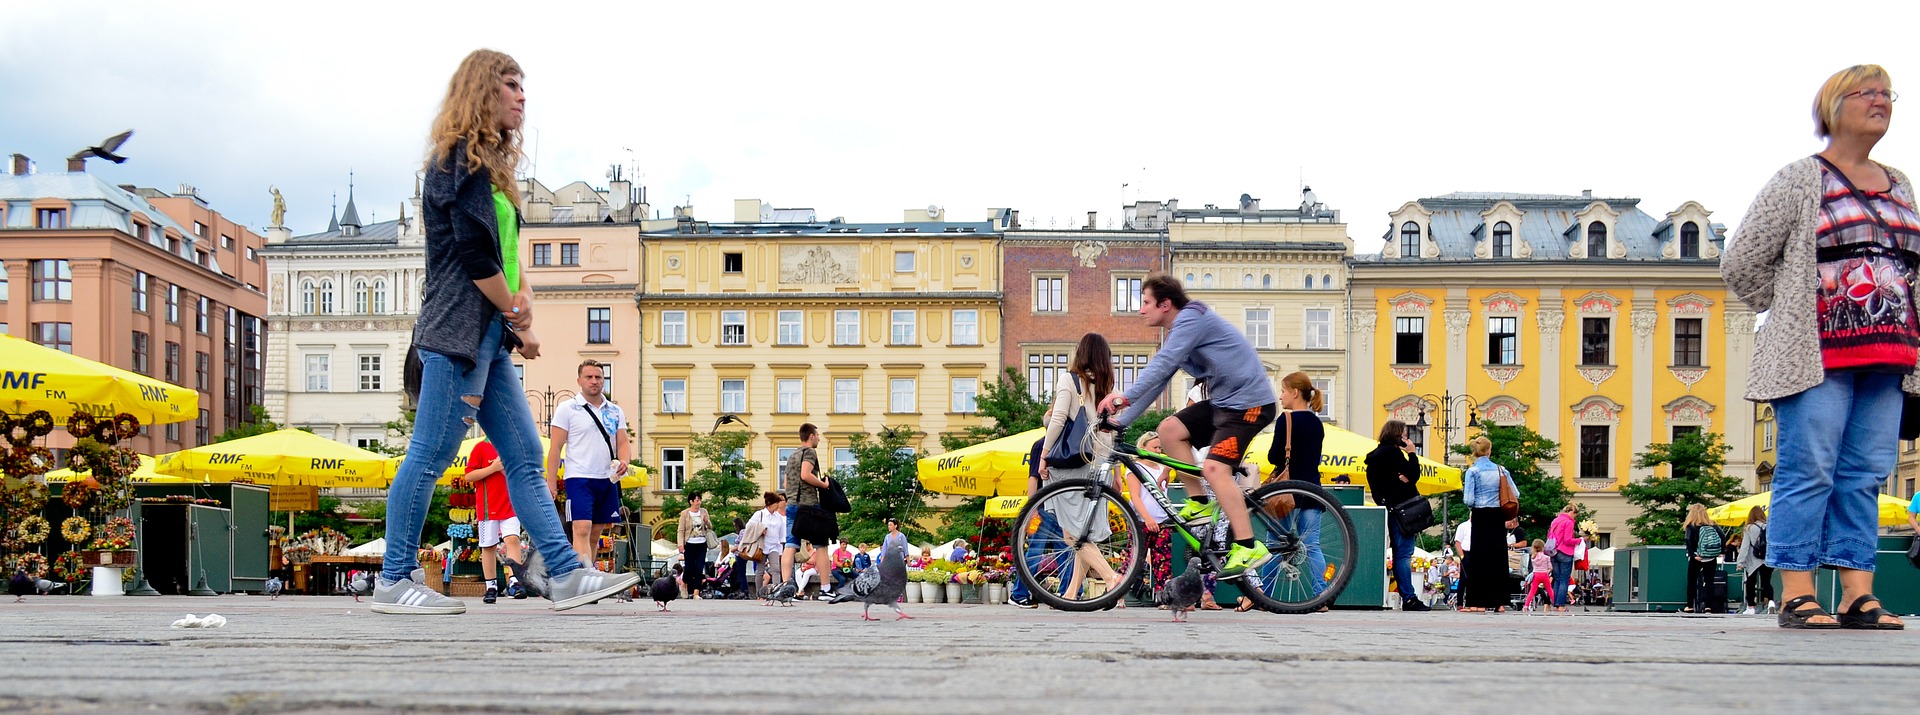 Cultural event in Krakow – how to find an accommodation, spend the time e.t.c.?